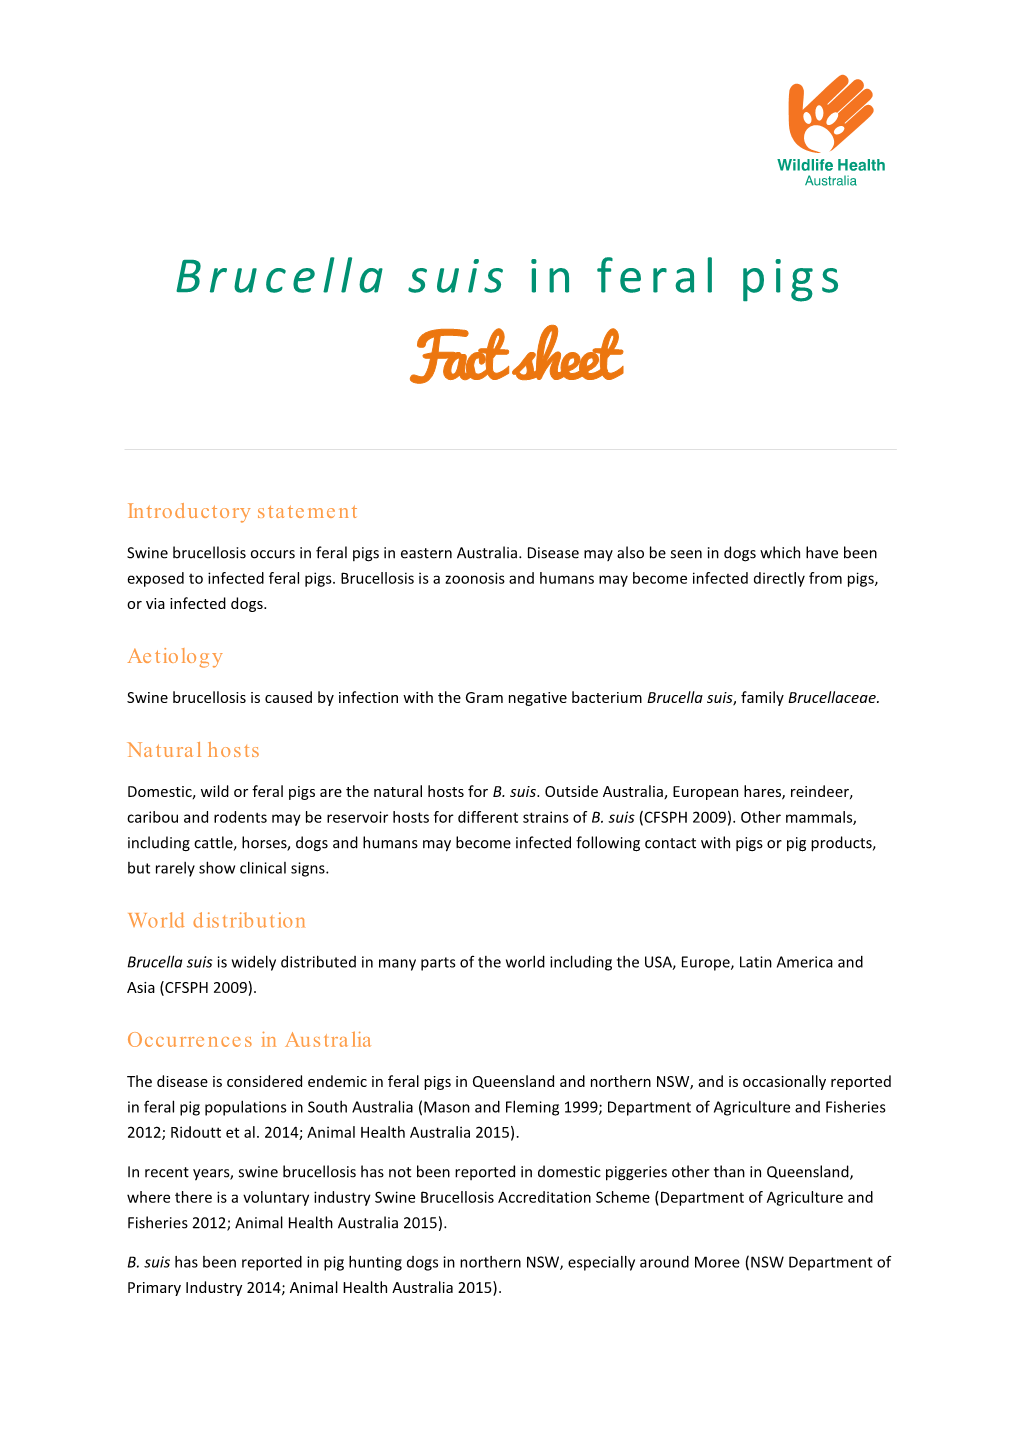 Brucella Suis in Feral Pigs Fact Sheet